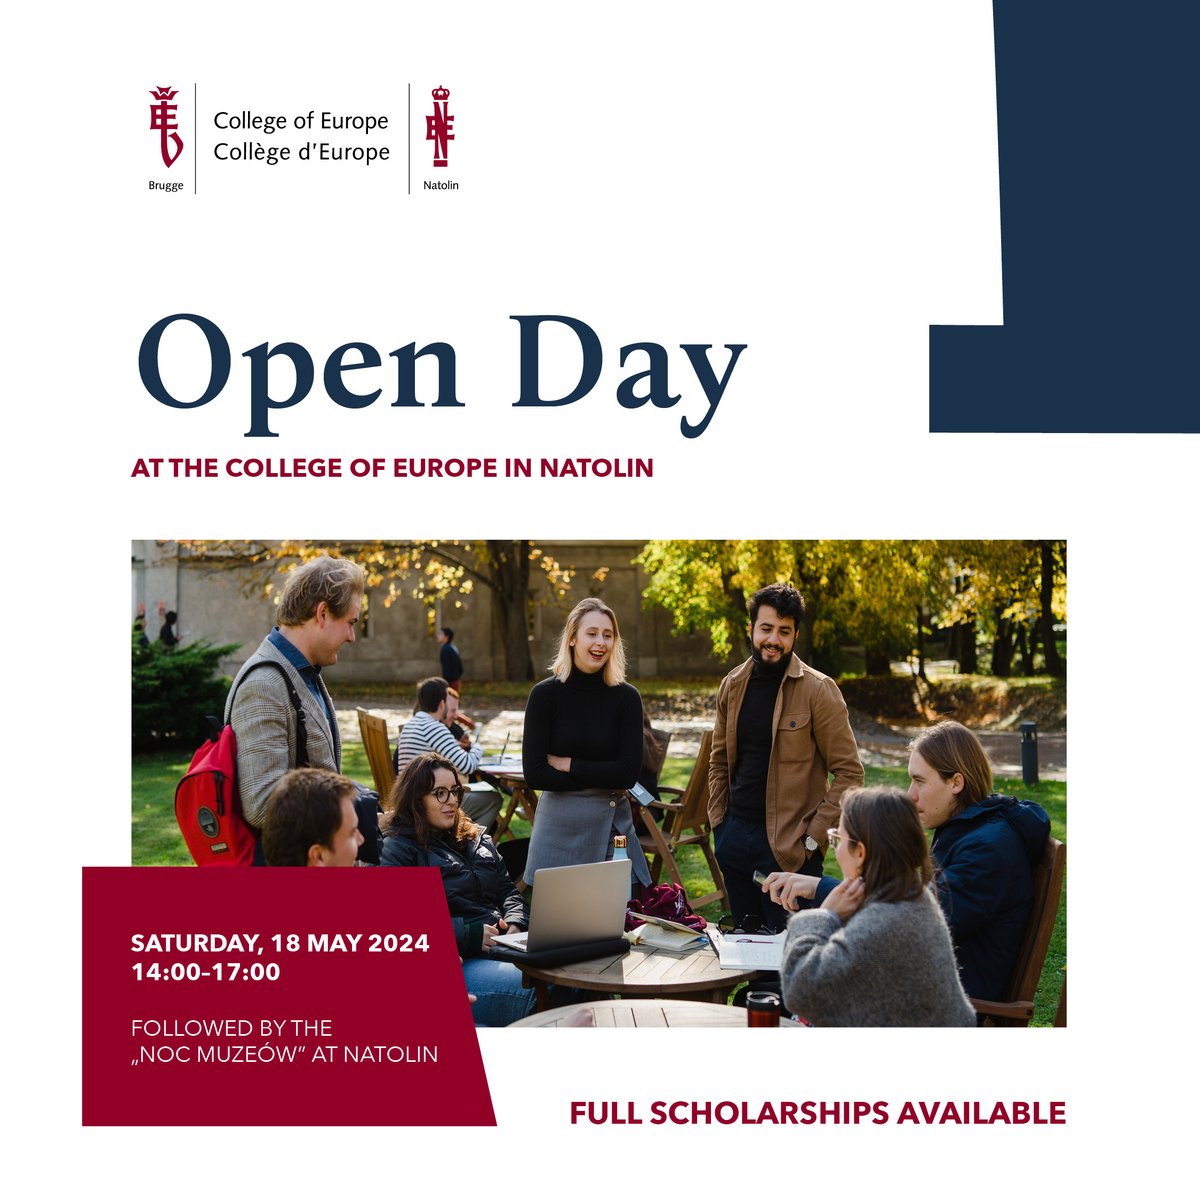 Wersja polska poniżej Join us at our Open Day on Saturday, 18 May 2024! The College of Europe in Natolin warmly invites all prospective students to come and learn about our academic offer, recruitment procedure, generous scholarship programmes, and discover our beautiful…